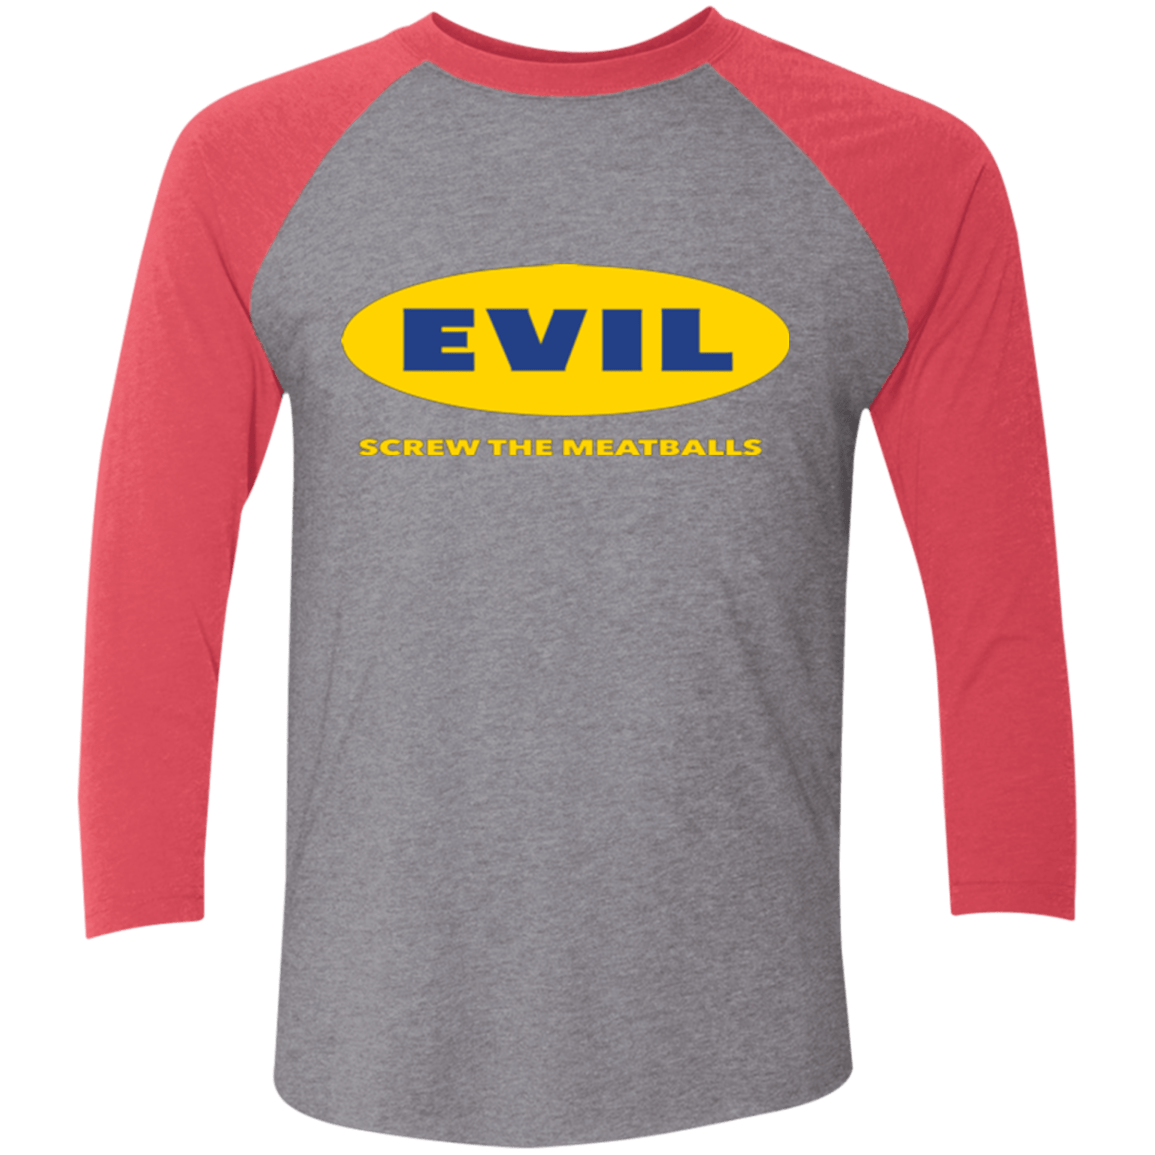 T-Shirts Premium Heather/ Vintage Red / X-Small EVIL Screw The Meatballs Triblend 3/4 Sleeve